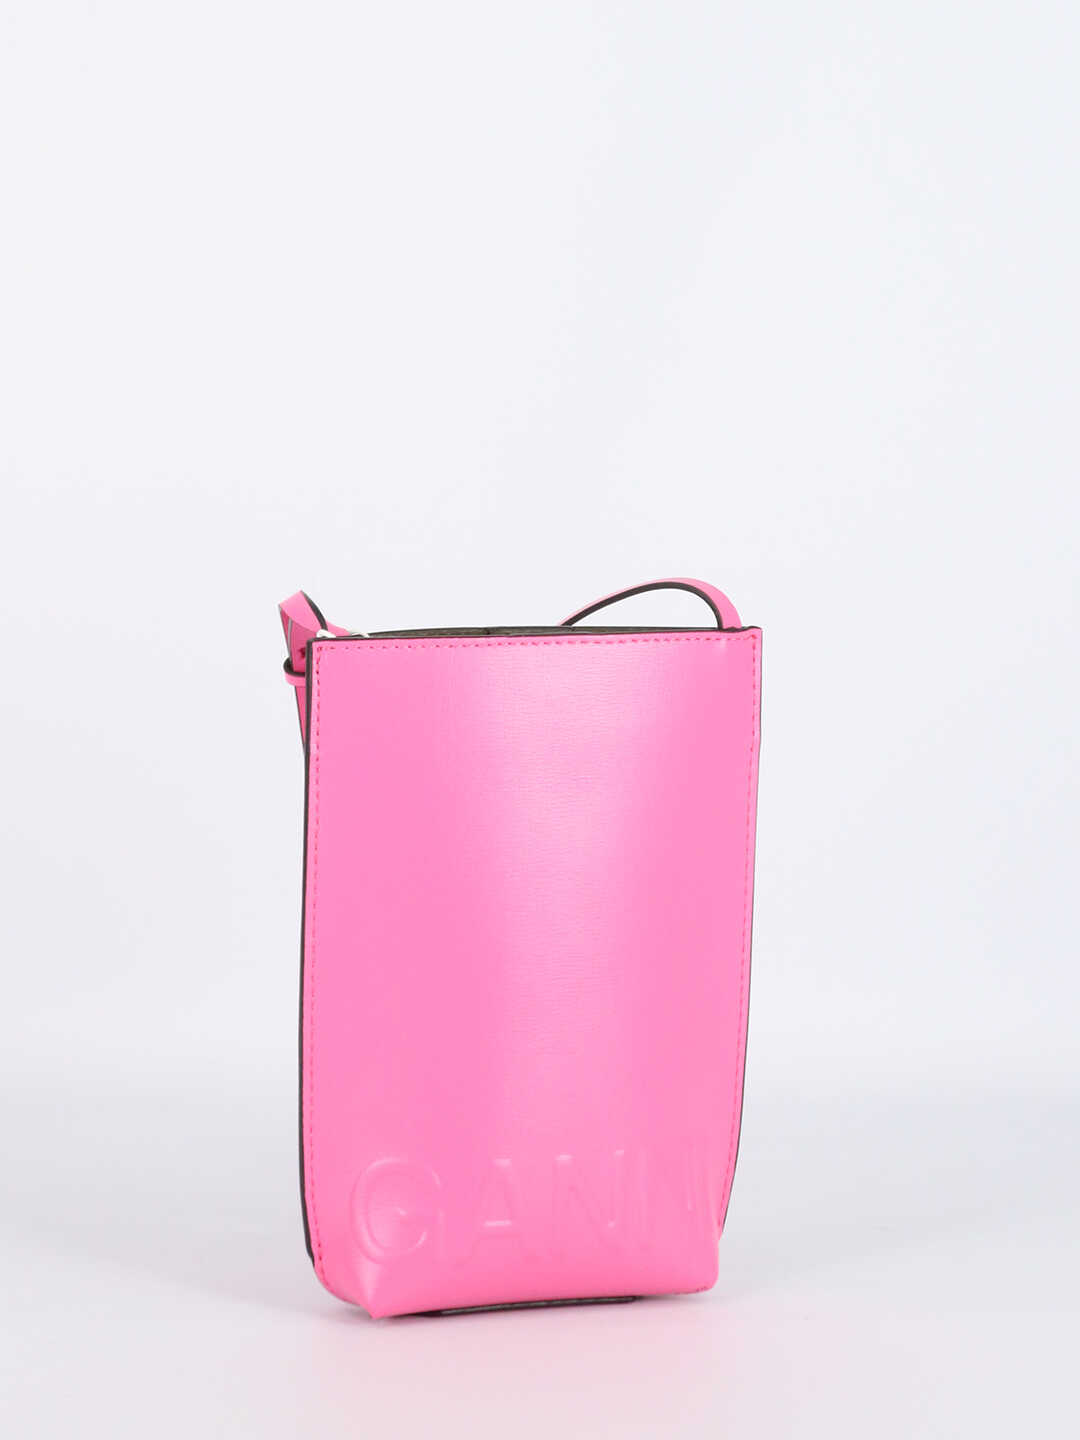 Ganni Recycled Leather Mini Bag A3873 Pink image